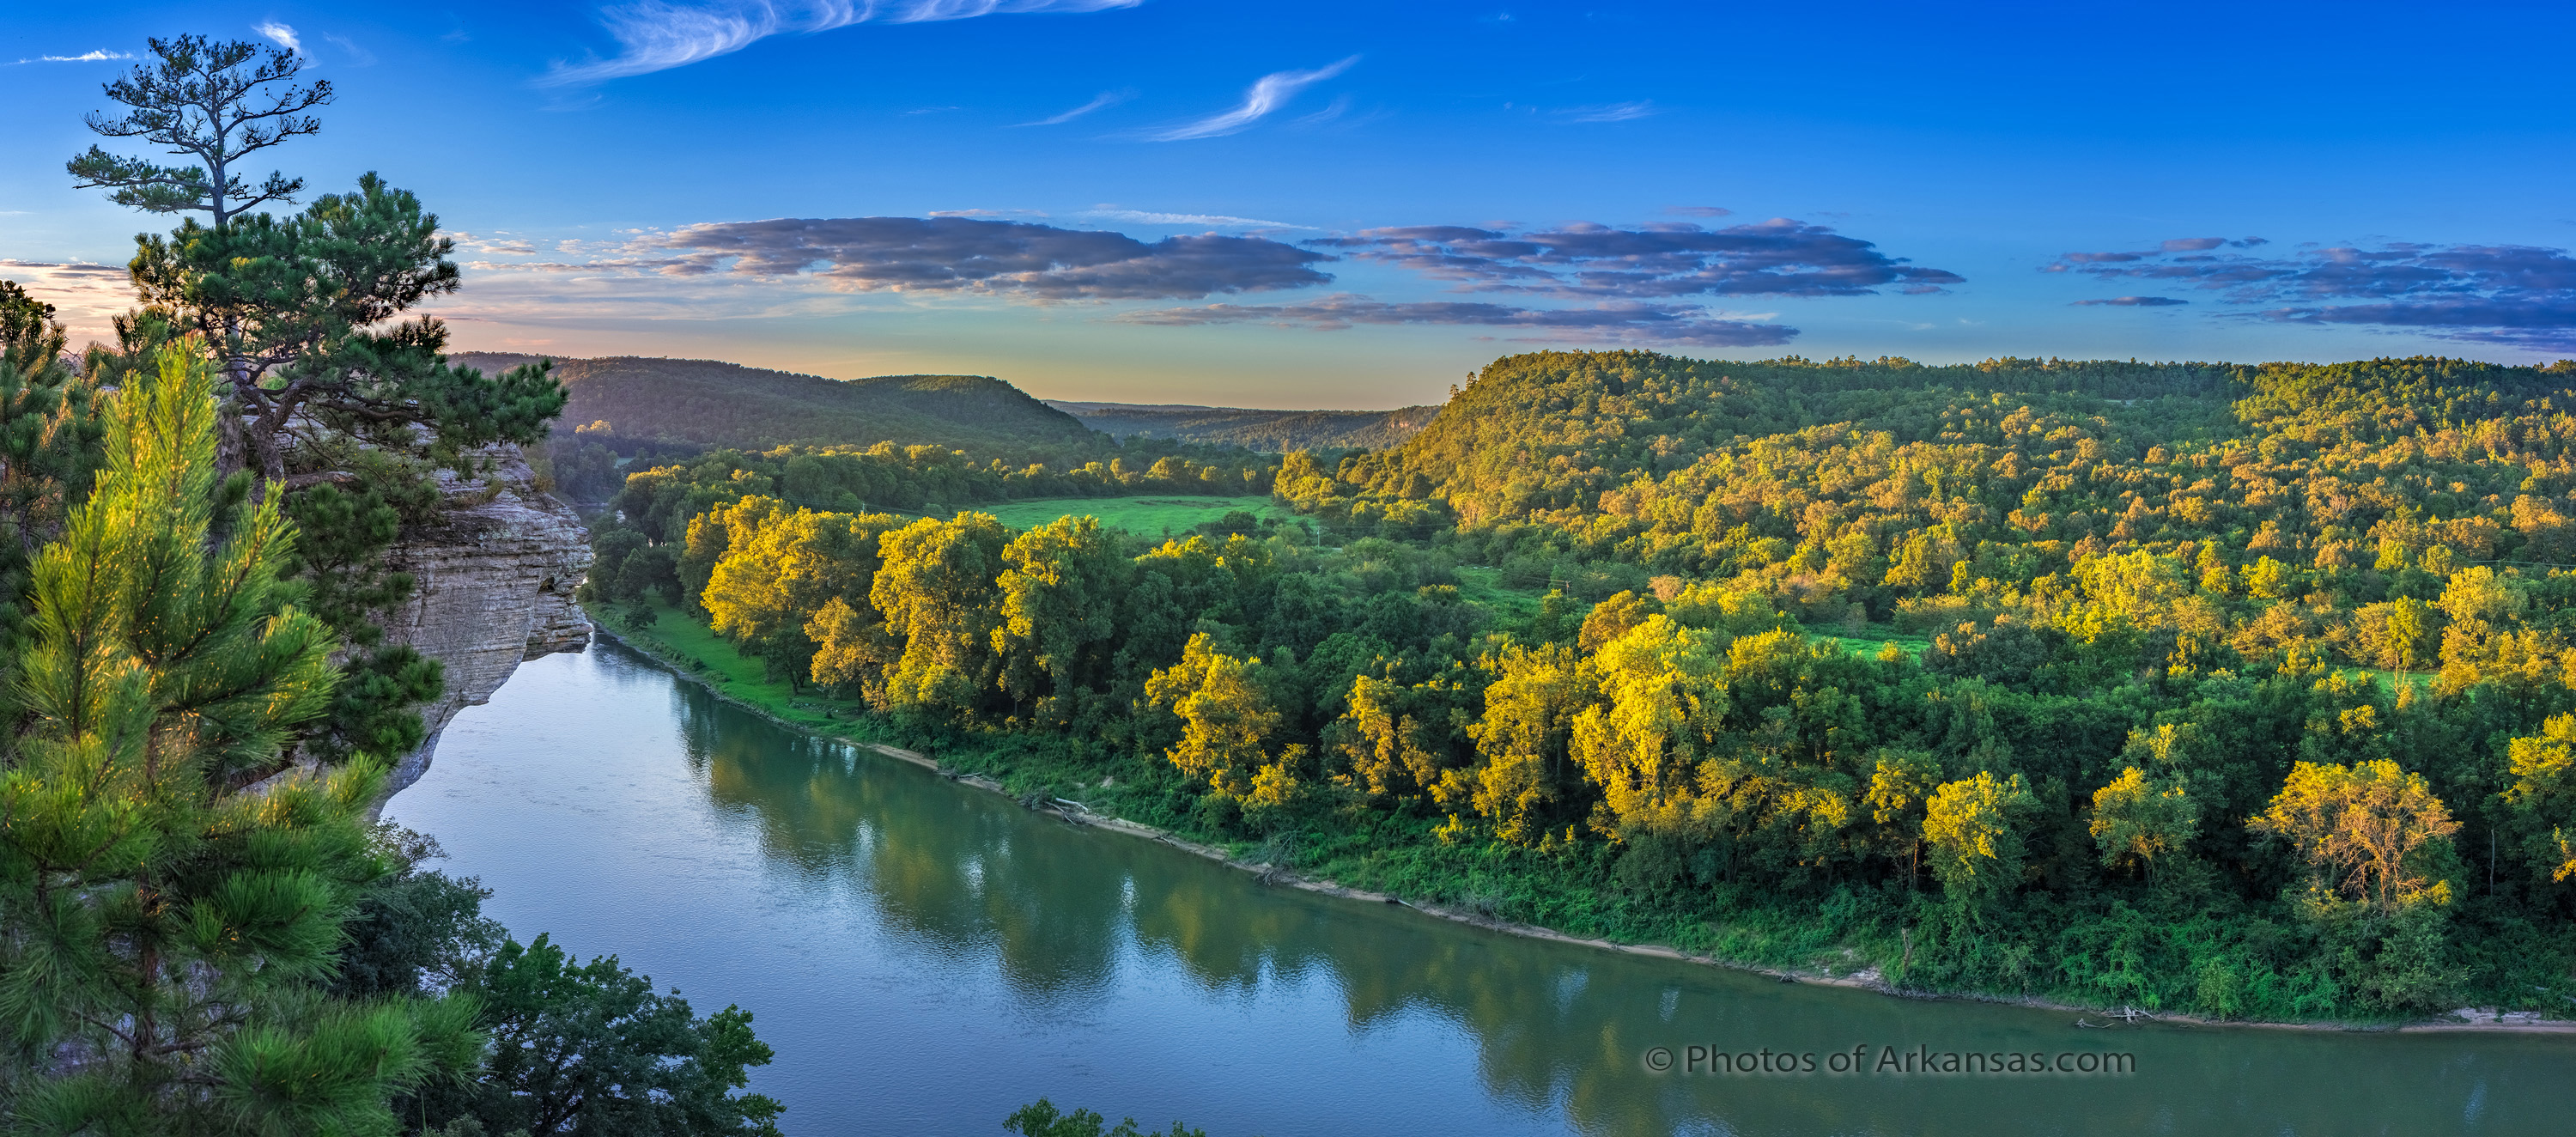 09/22/16 Featured Arkansas Landscape Photography-Sunset at Calico Rock on the White River ...